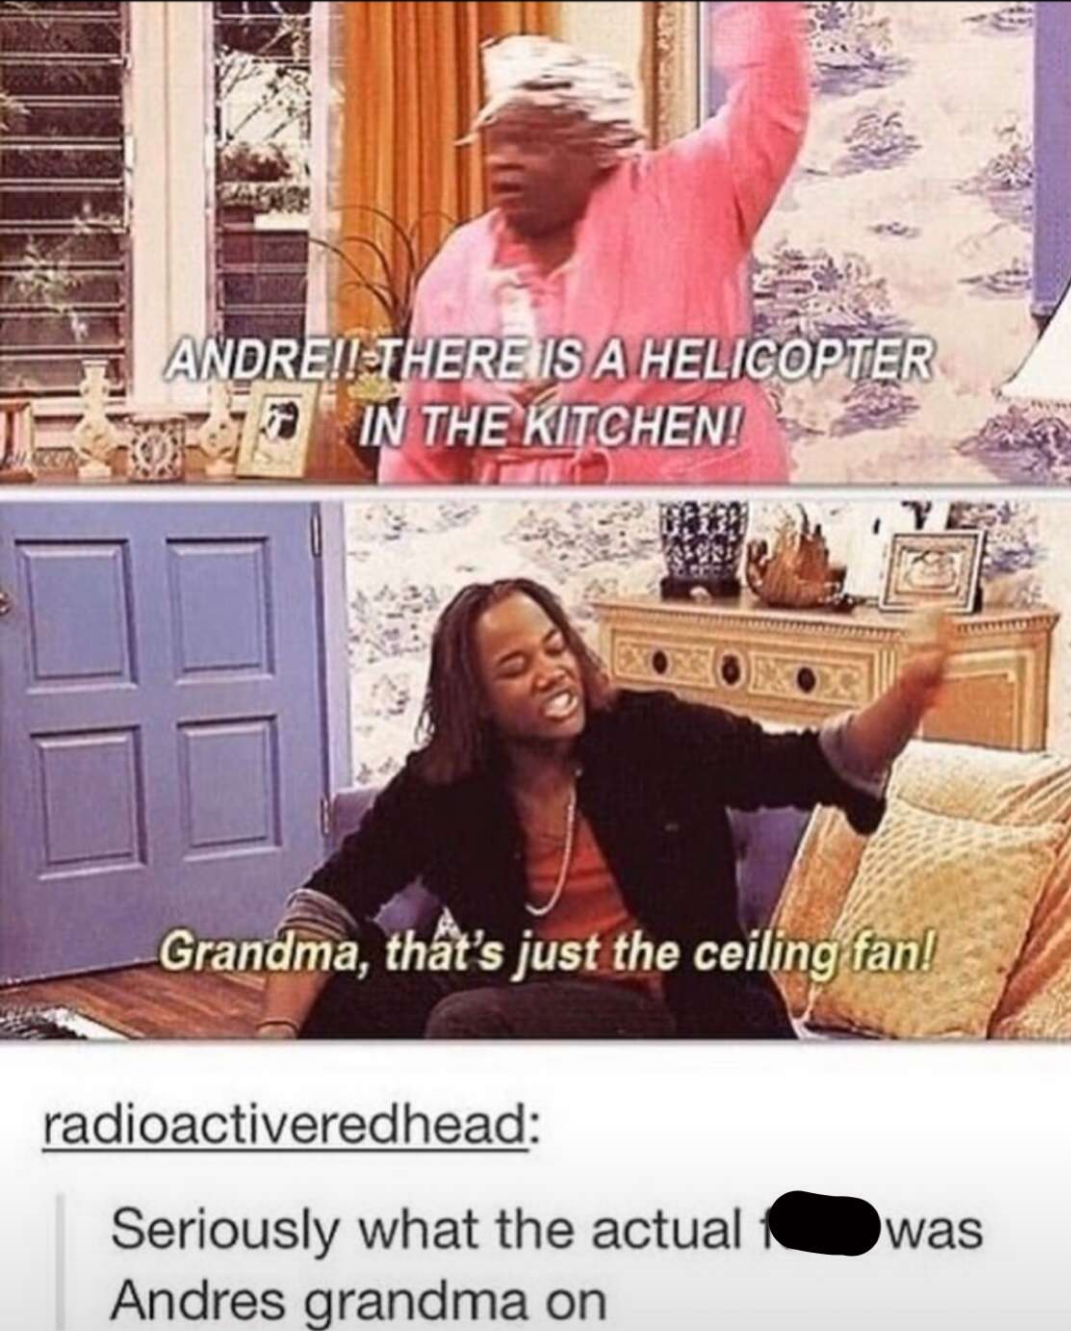 andre's grandma - AndreilThere Is A Helicopter In The Kitchen! Grandma, tht's just the ceiling fan! radioactiveredhead Seriously what the actual Andres grandma on was